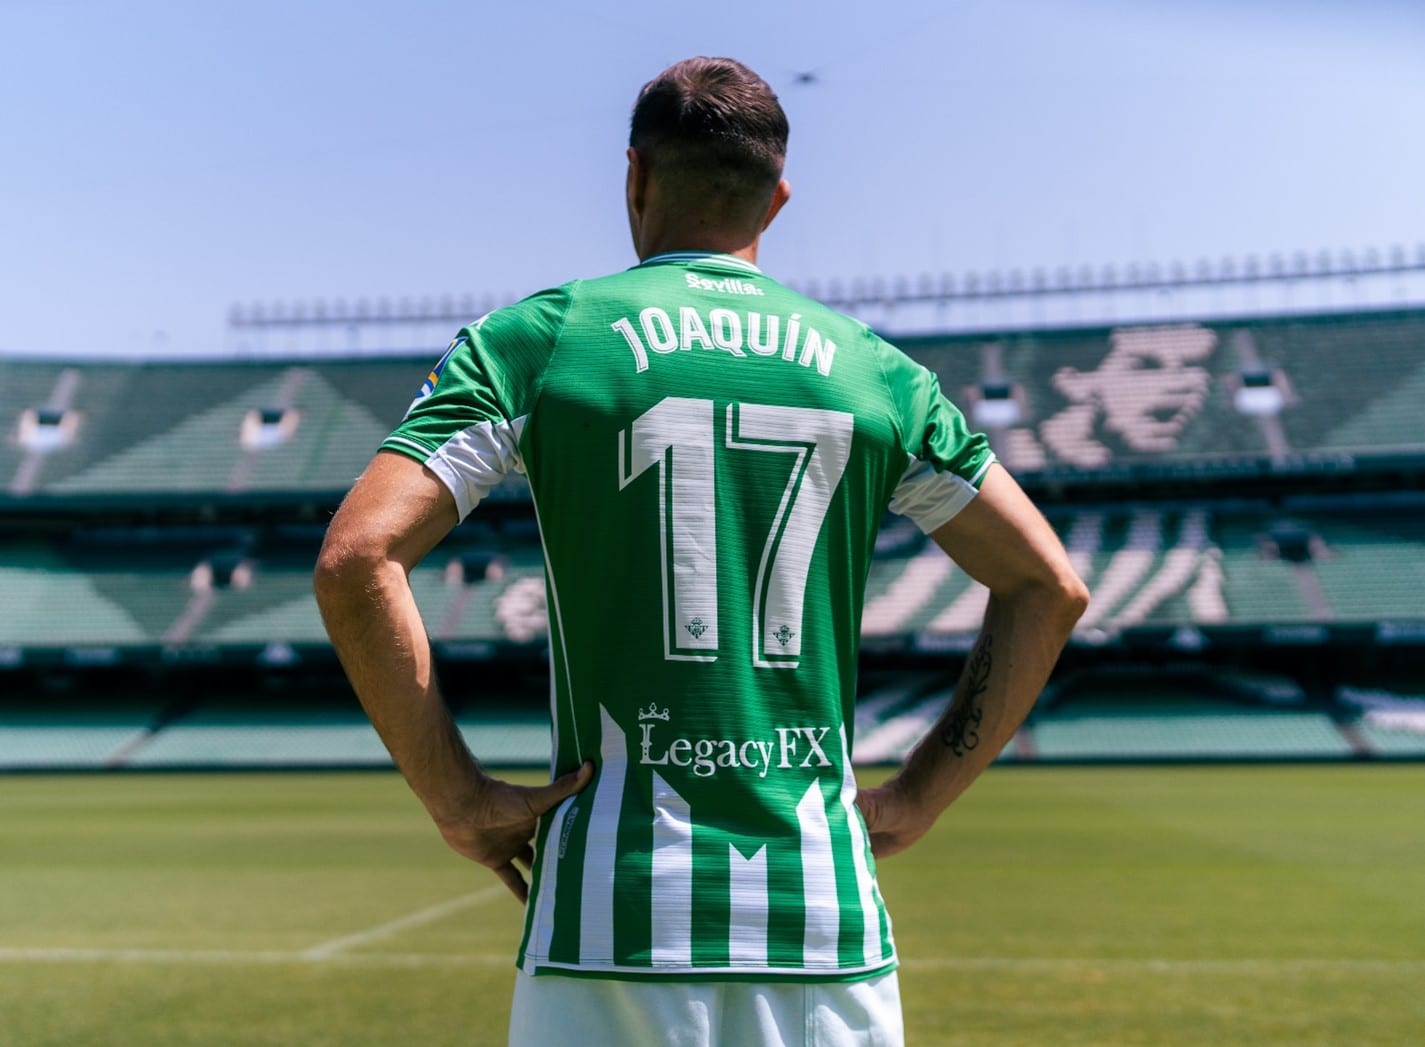 LegacyFX Signs Sponsorship Deal with Spanish Football Club Real Betis